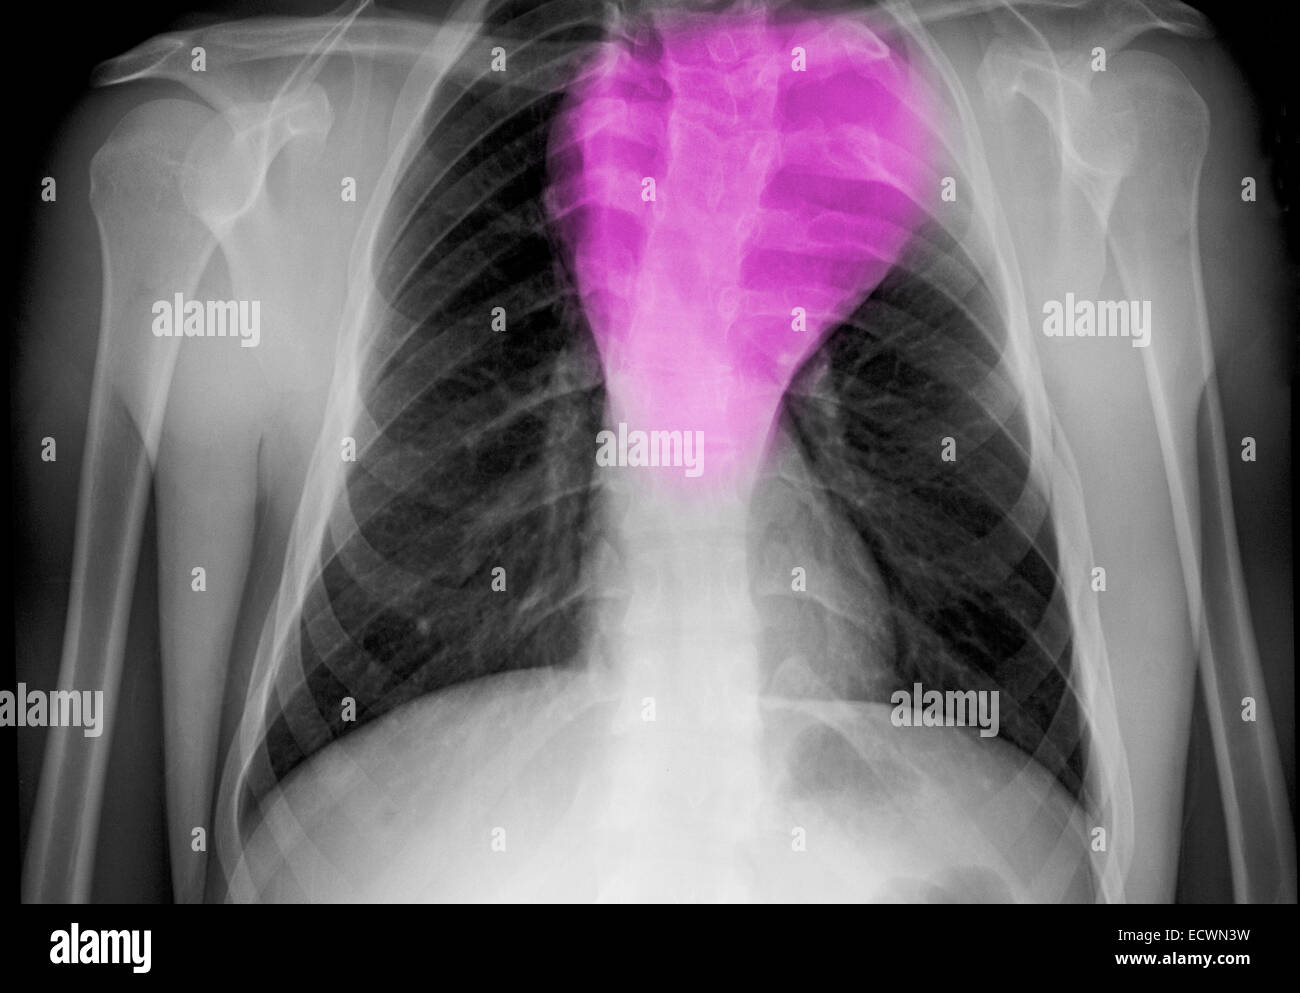 chest x-ray showing a benign chest mass. Stock Photo